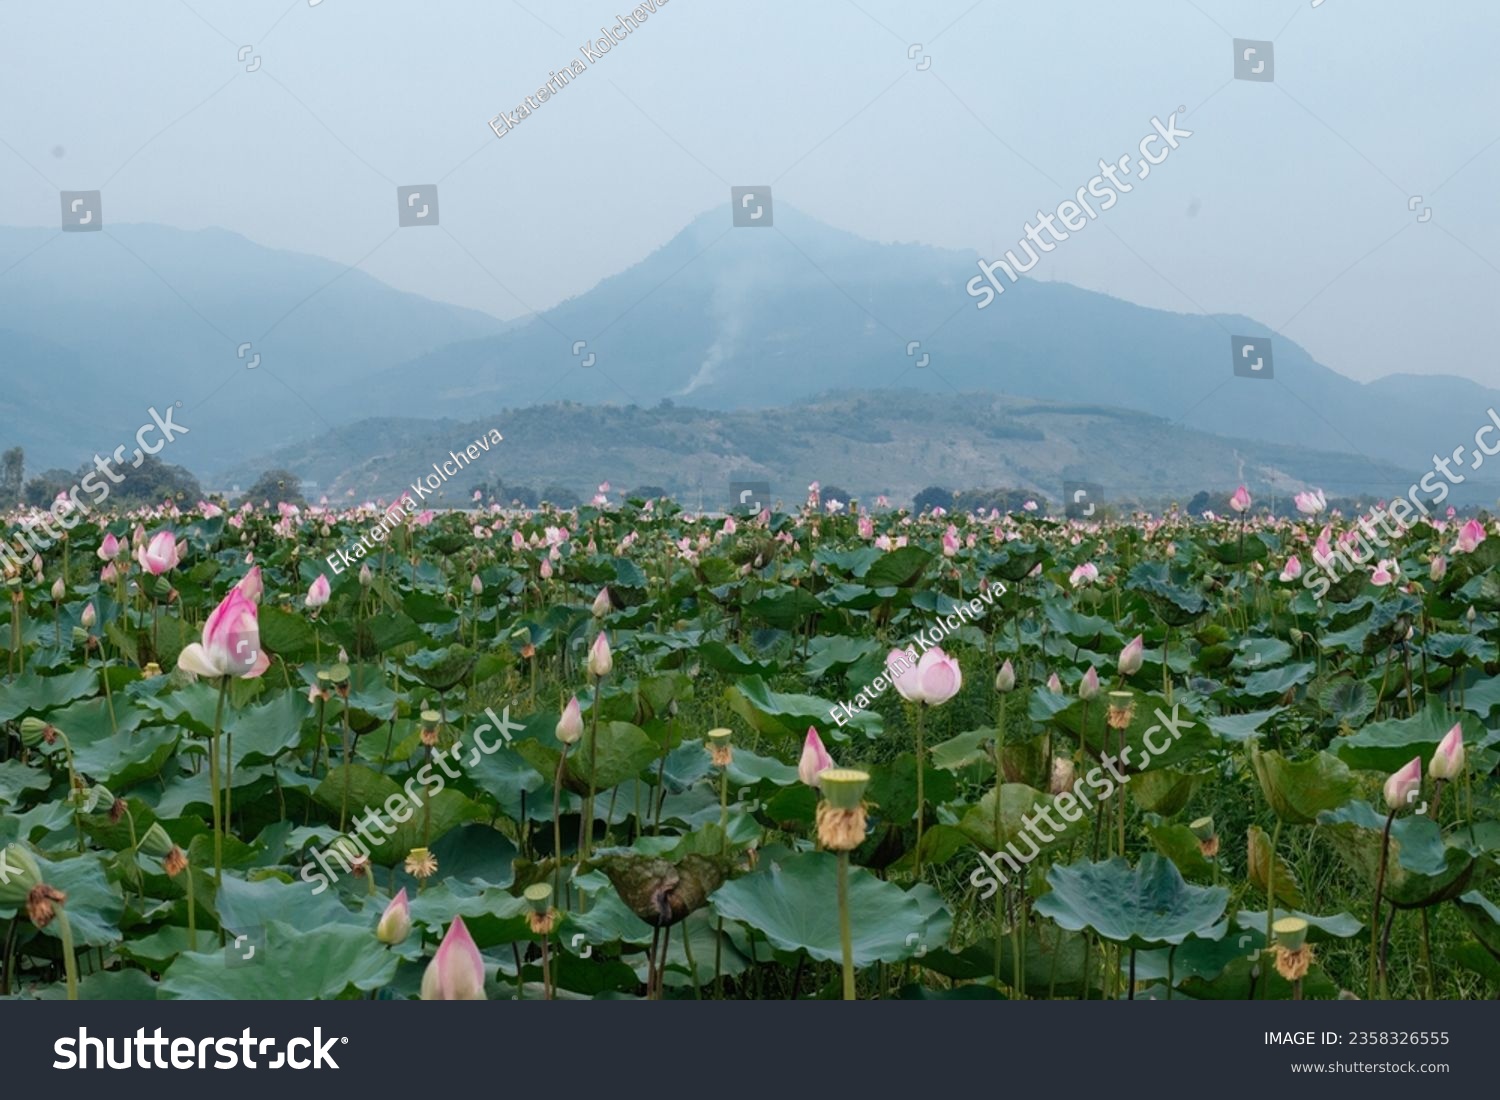 Lotus field, mountains in the background. Vietnam. Growing lotuses for cooking, ethnoscience, lotus tea
 #2358326555